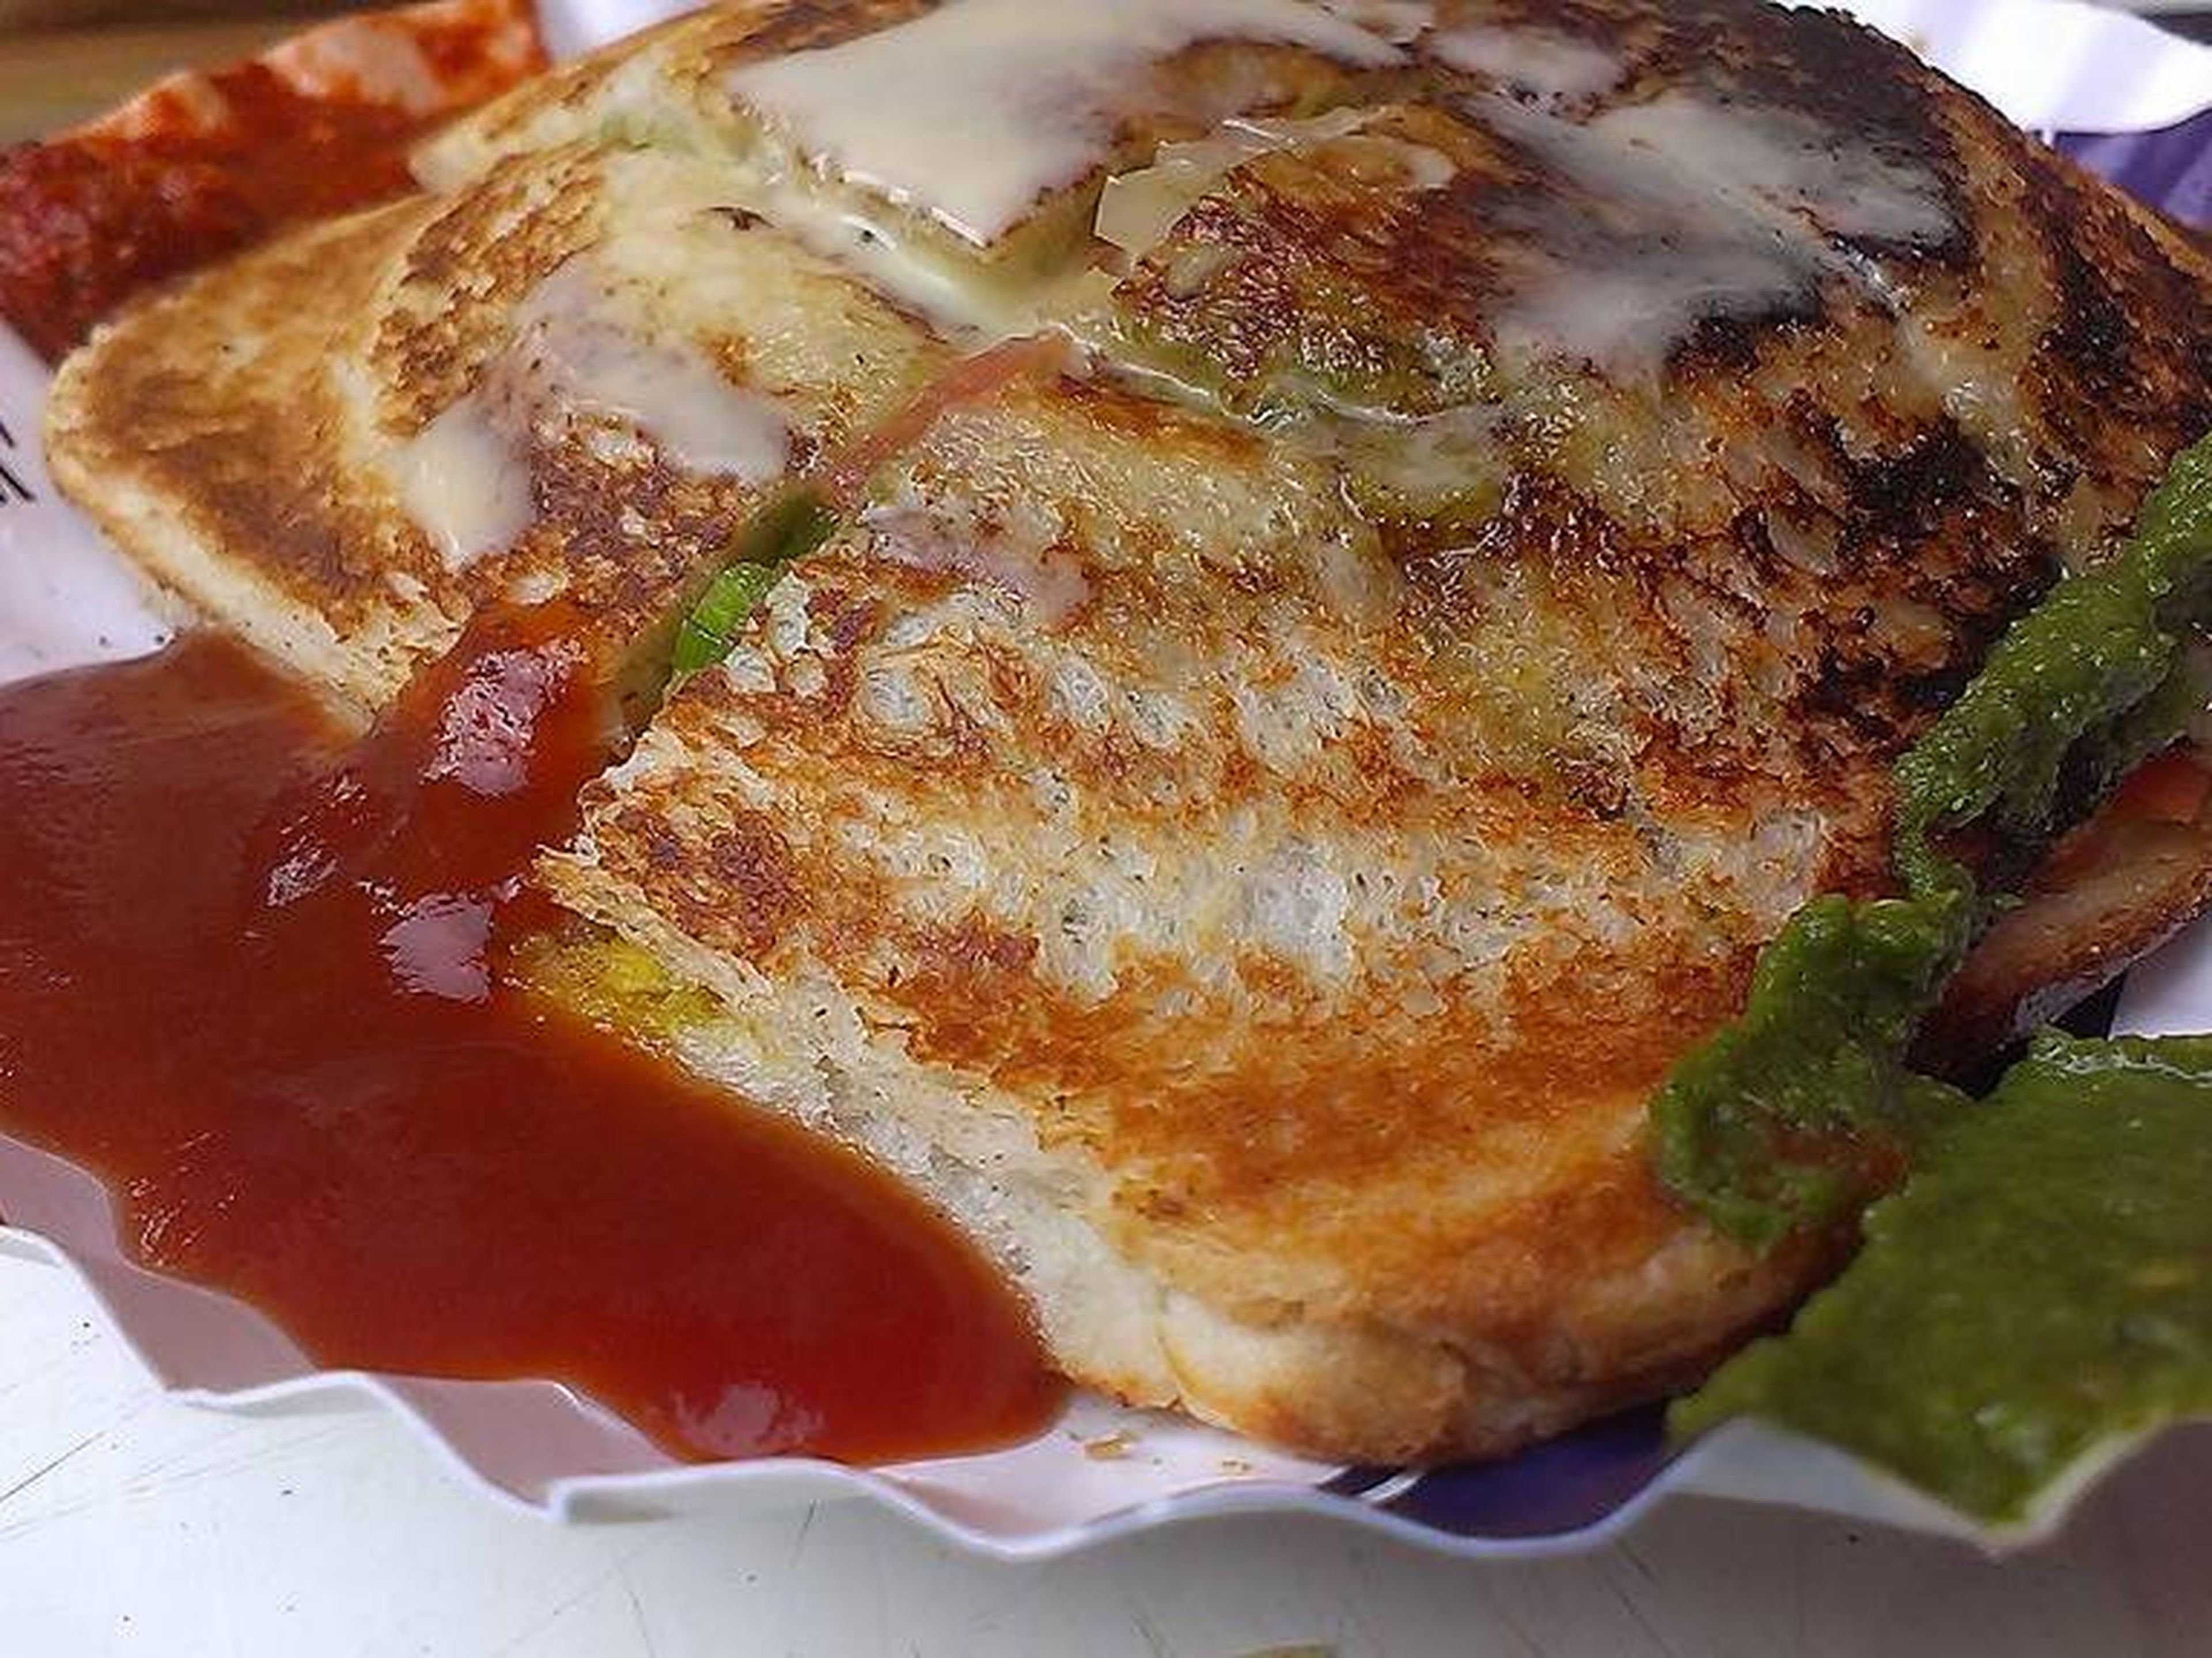 It can be served in four triangles, which Shah says helps keep the layers from spilling out the sides. "Toast and grill sandwiches have the most refreshing tangy taste after each bite," she says. "It's affordable and a must-have